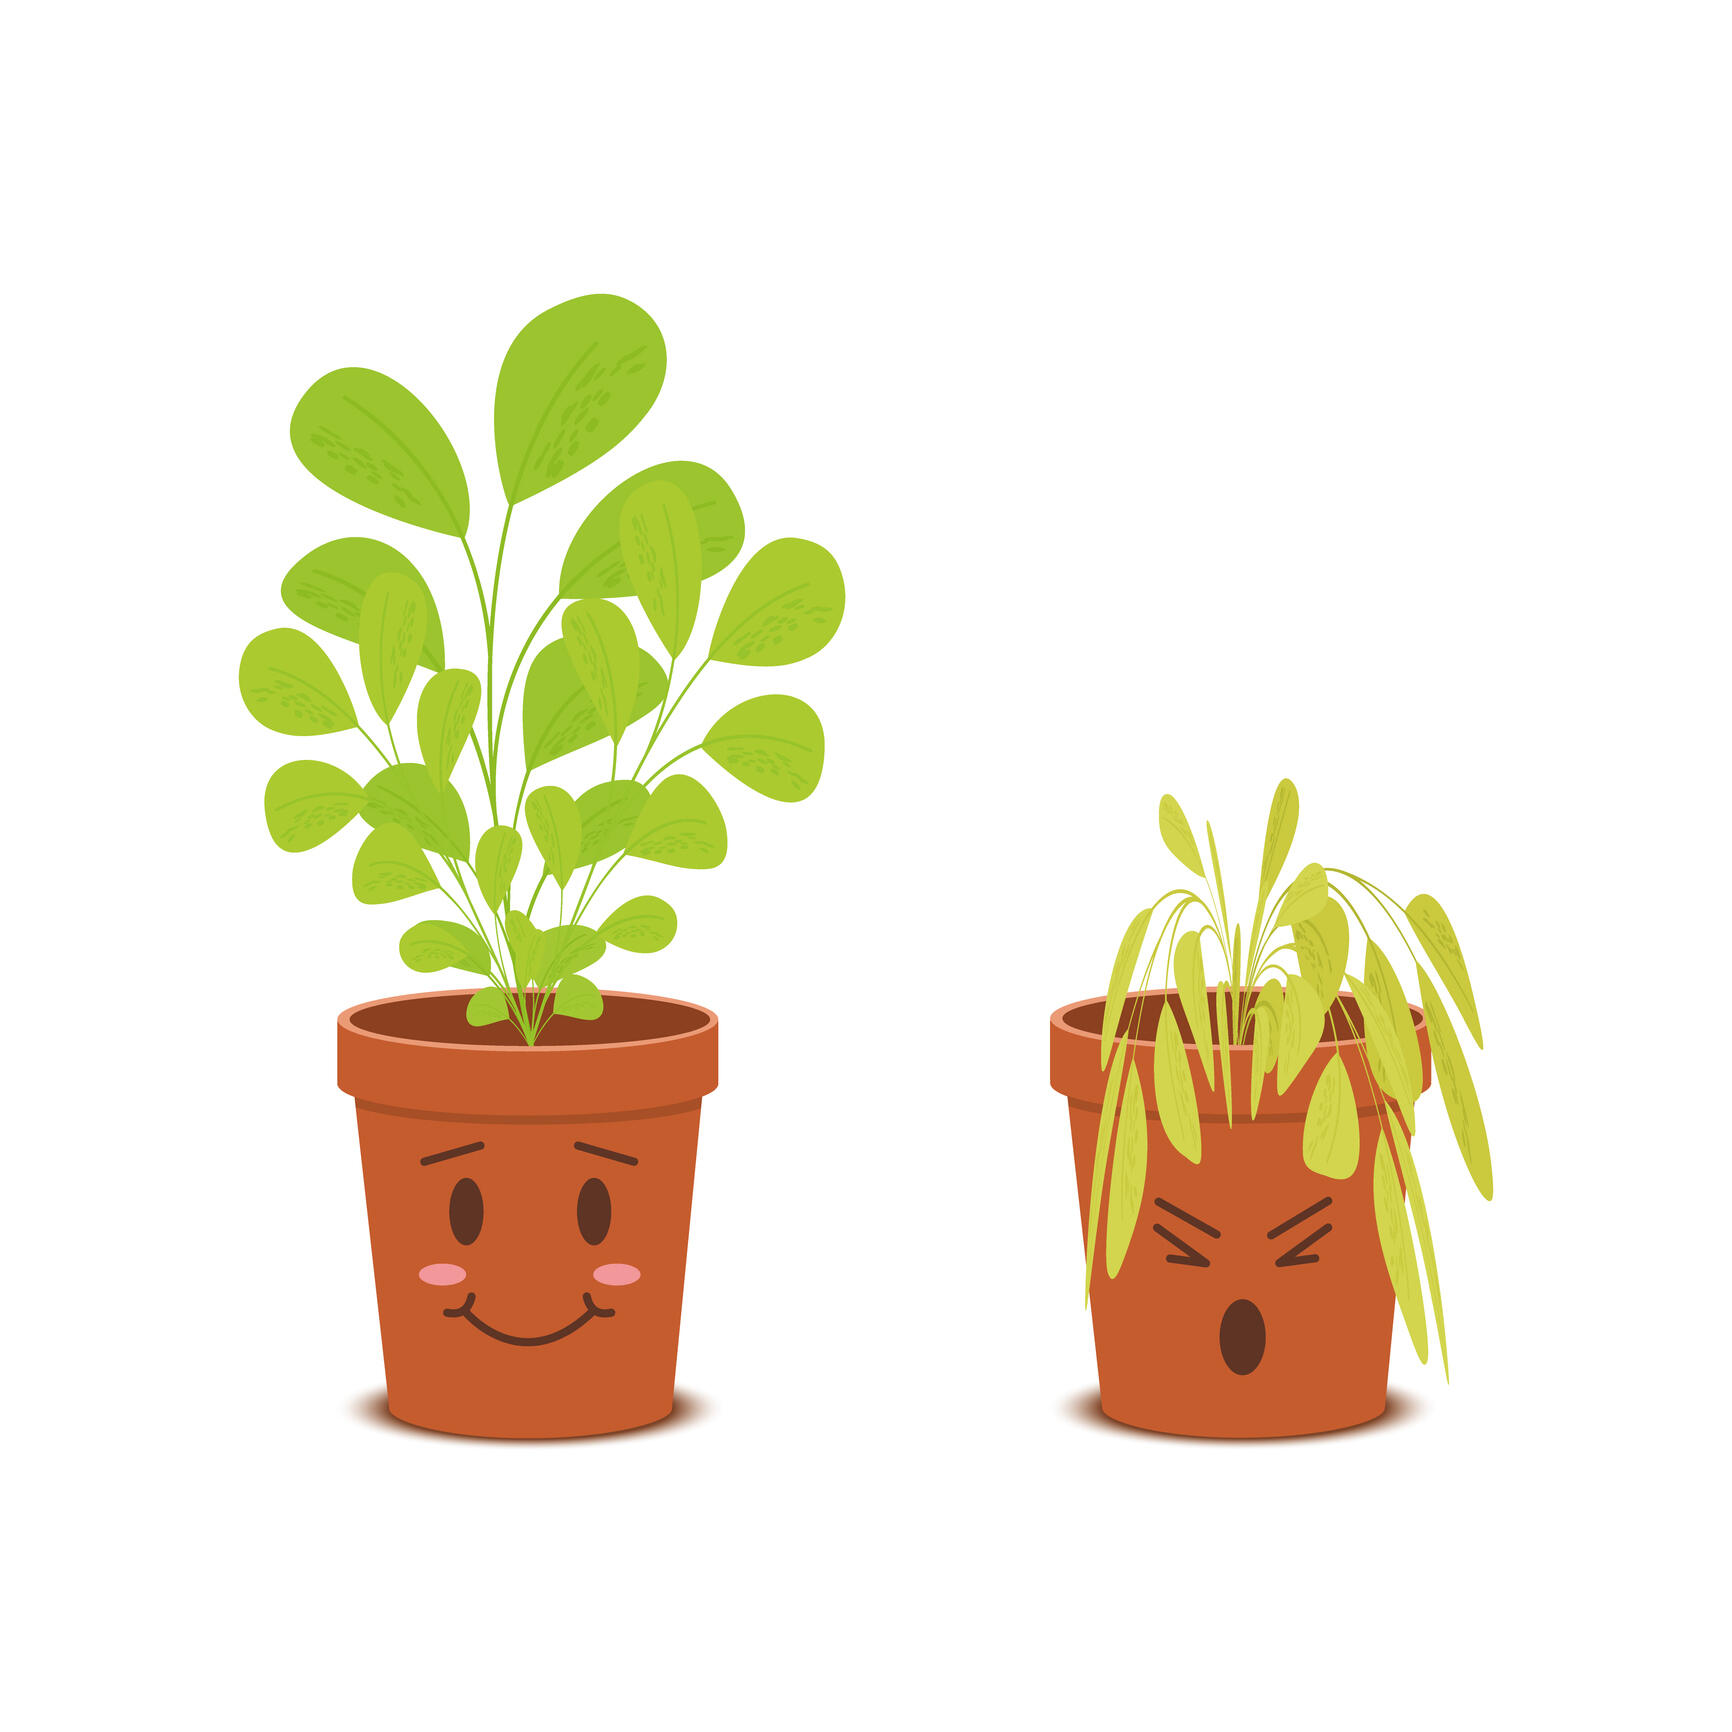 An illustration of two potted plants. The plant on the left is healthy looking and the pot is smiling. The plant on the right is wiliting and the pot is making a distressed expression. 